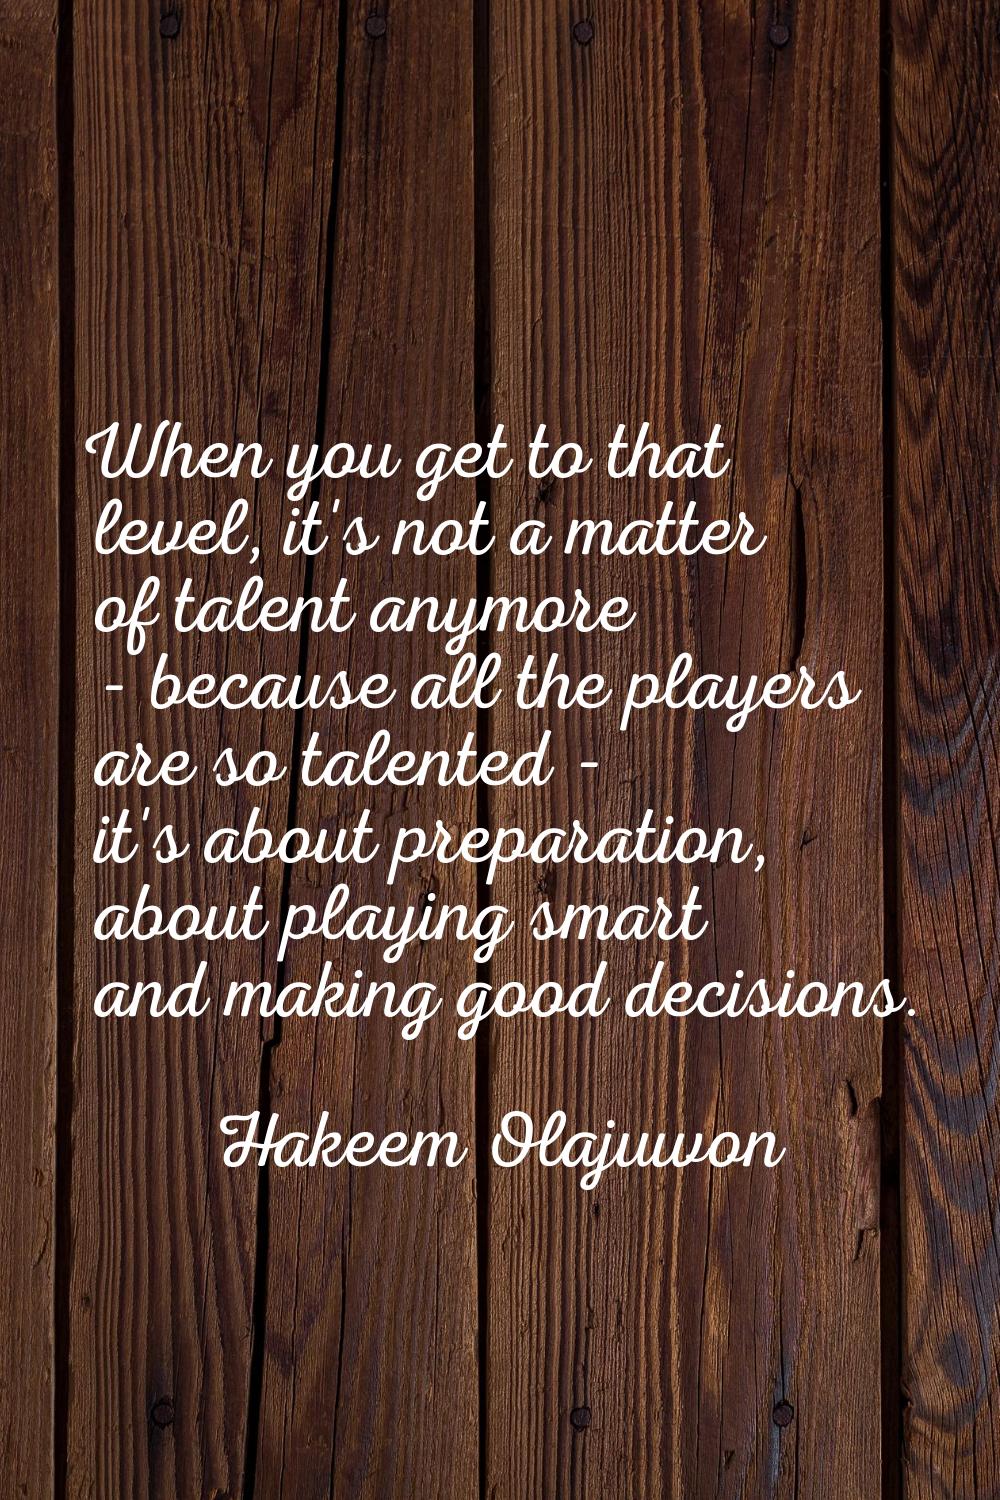 When you get to that level, it's not a matter of talent anymore - because all the players are so ta